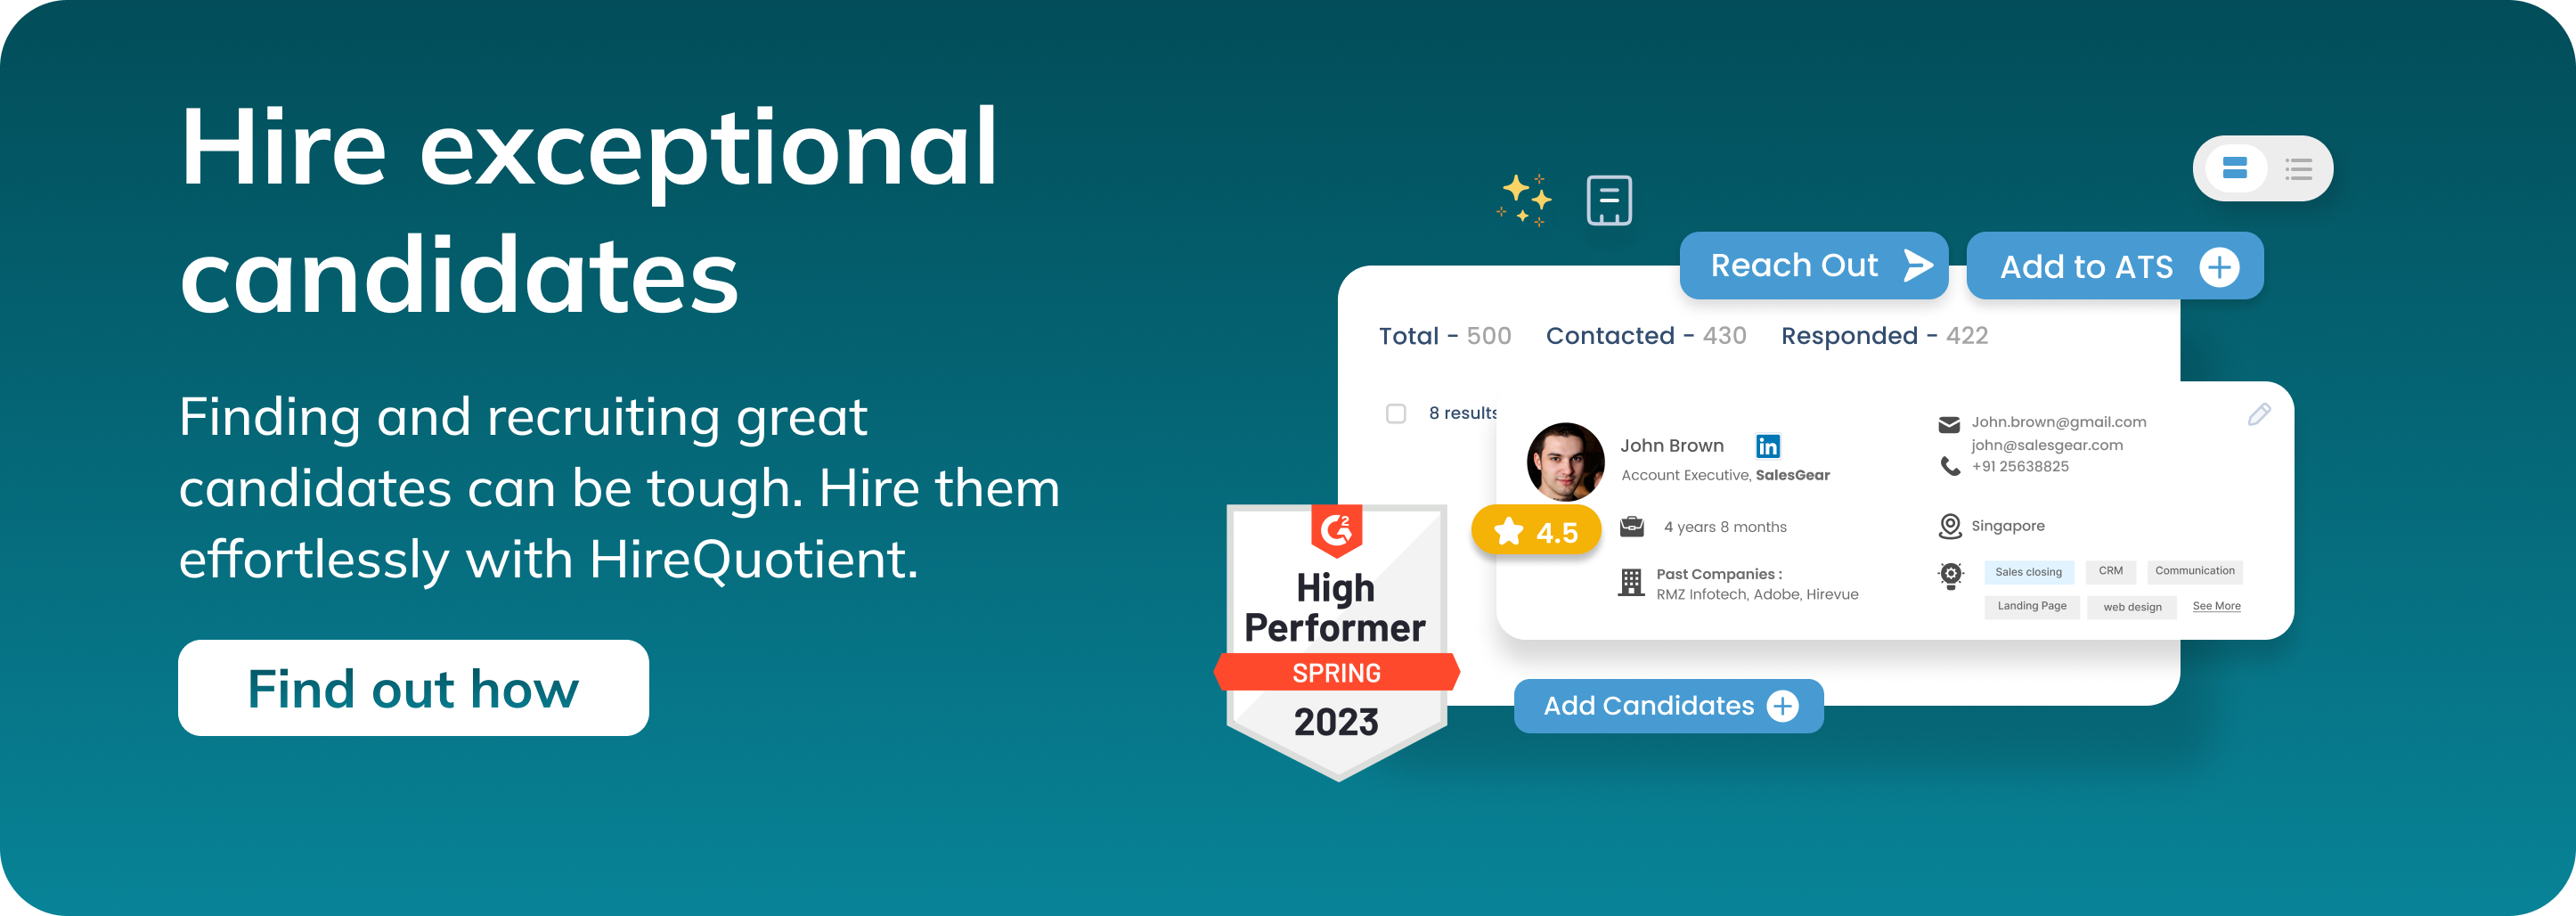 https://calendly.com/hello-hirequotient/introductory-call